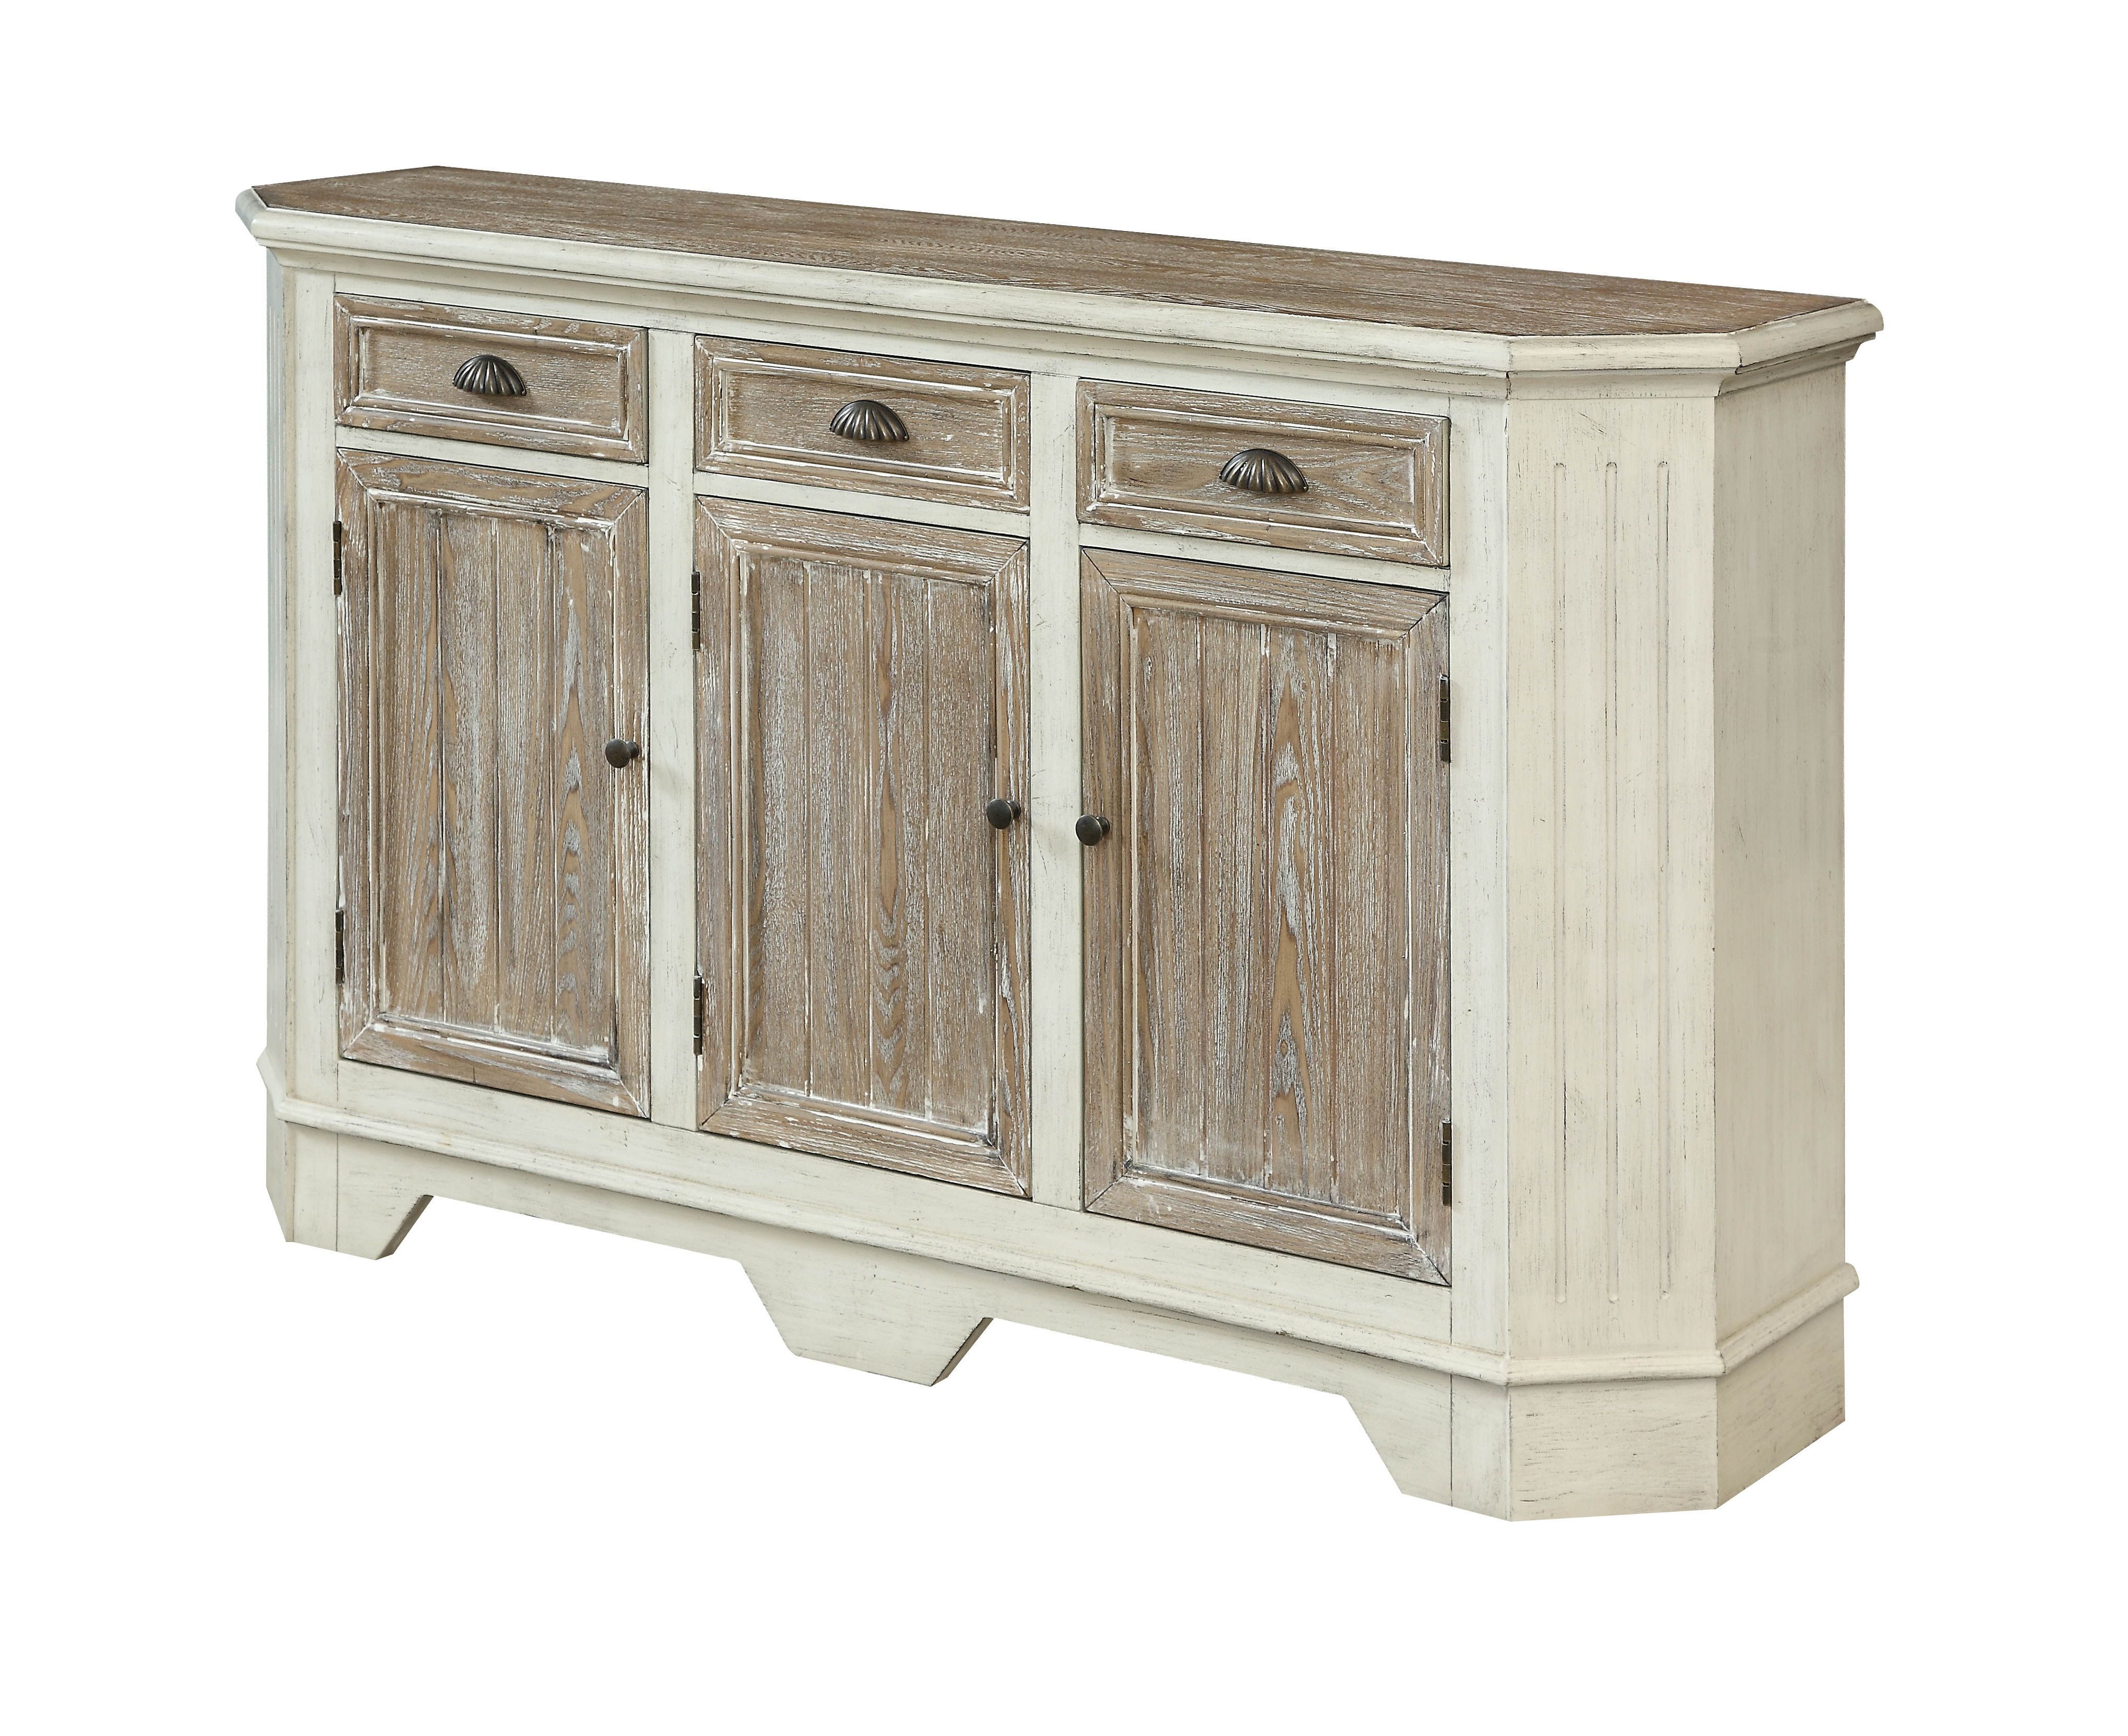 Classy I Winning Home Kitchen Credenza Ideas Wheeland For Amityville Sideboards (Gallery 14 of 20)